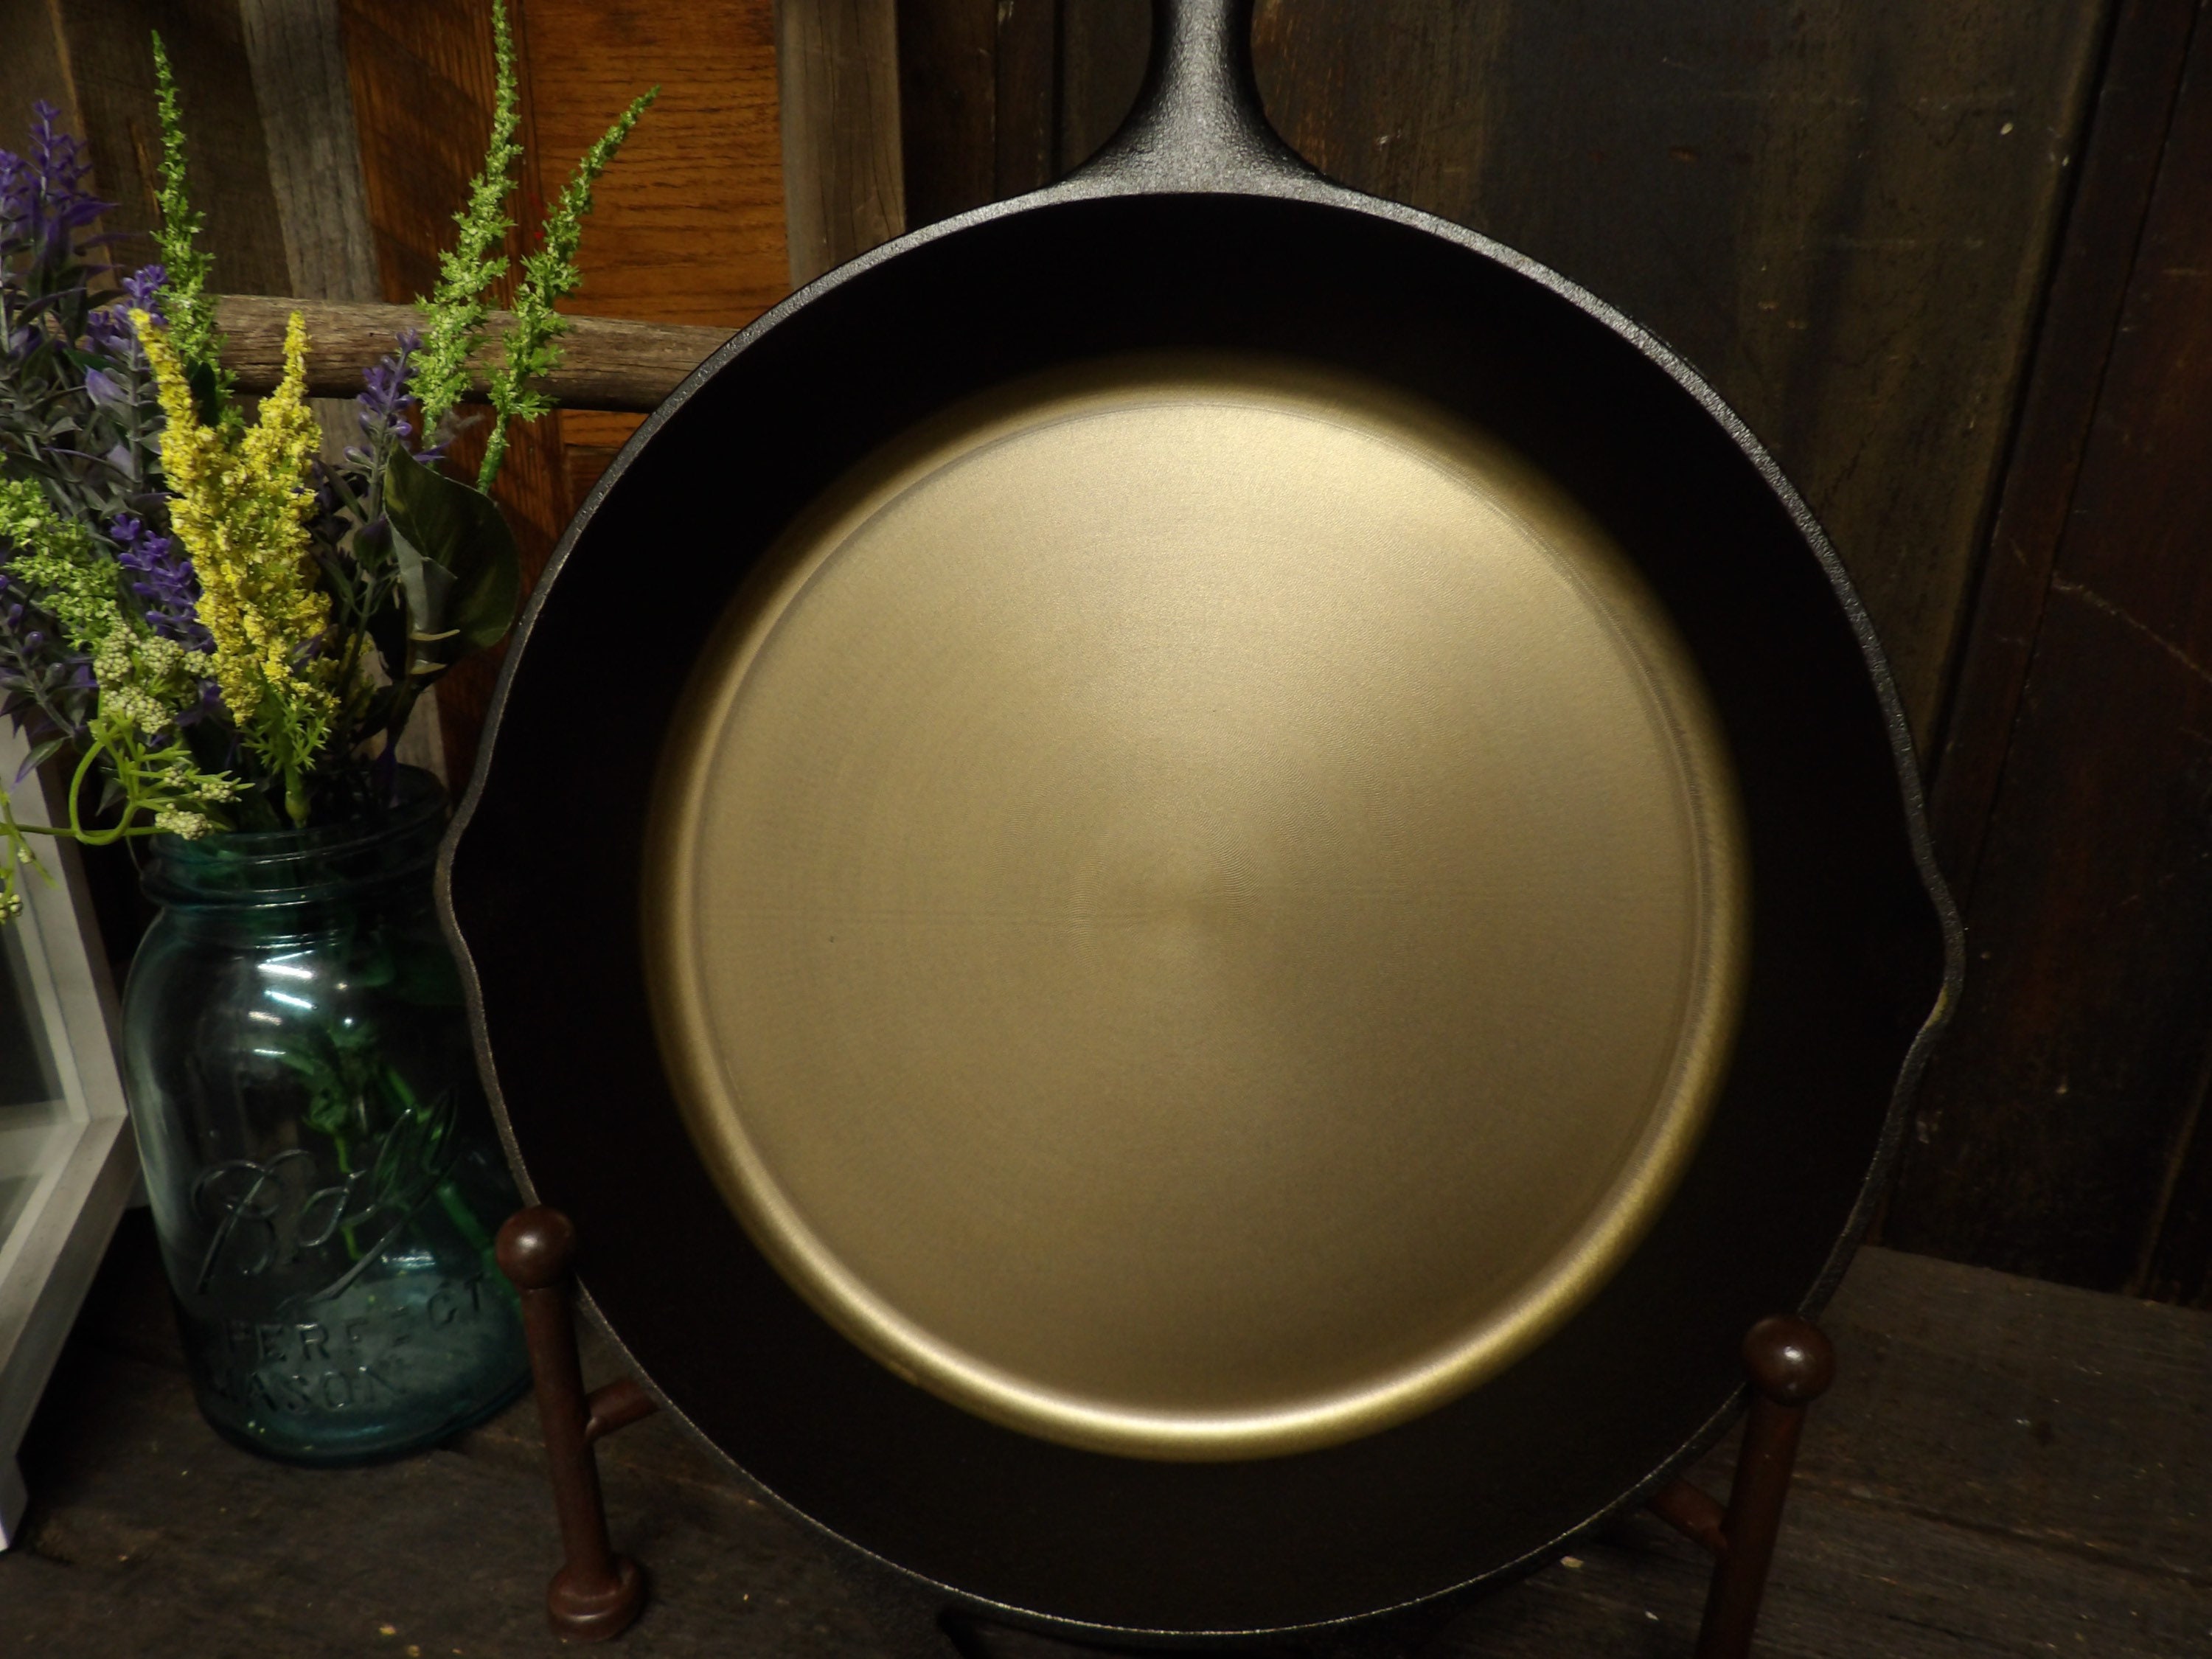 New Products Polished Smooth Cast Iron Skillet By Shijiazhuang